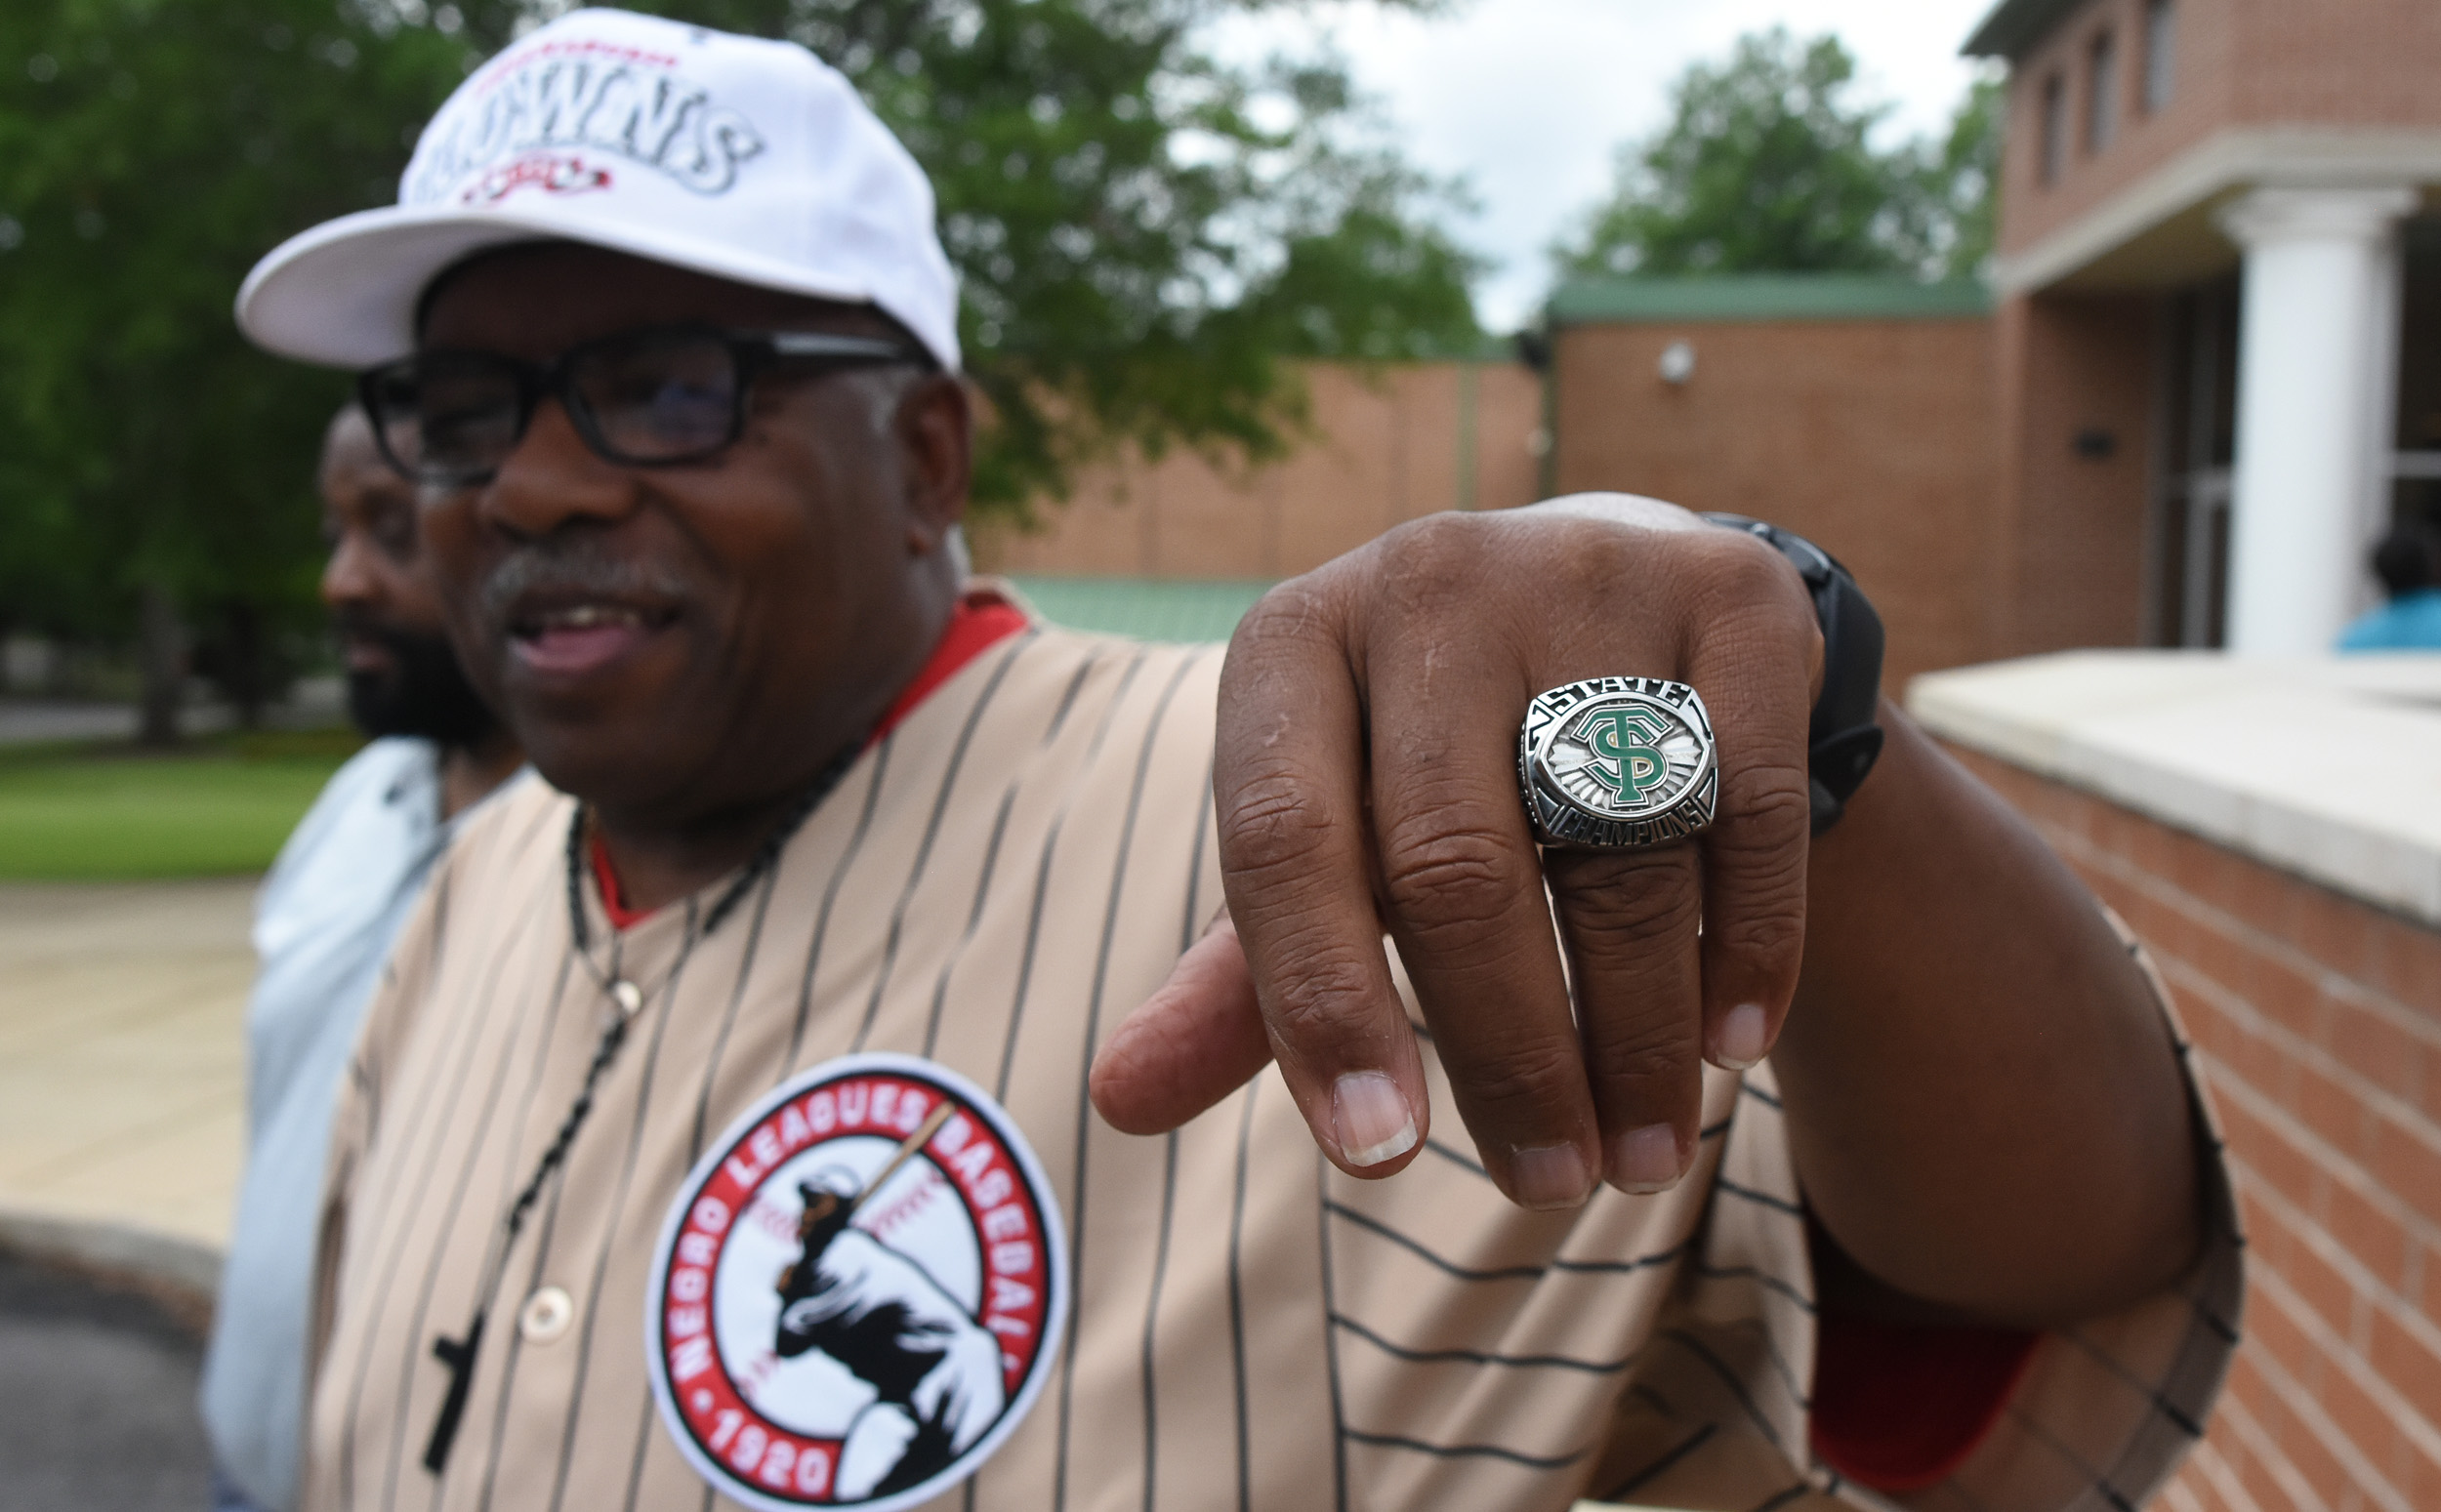 Russell "Crazy Legs" Patterson of the Indianapolis Clowns from the Negro American League displays a championship ring. (Solomon Crenshaw Jr./For The Birmingham Times).